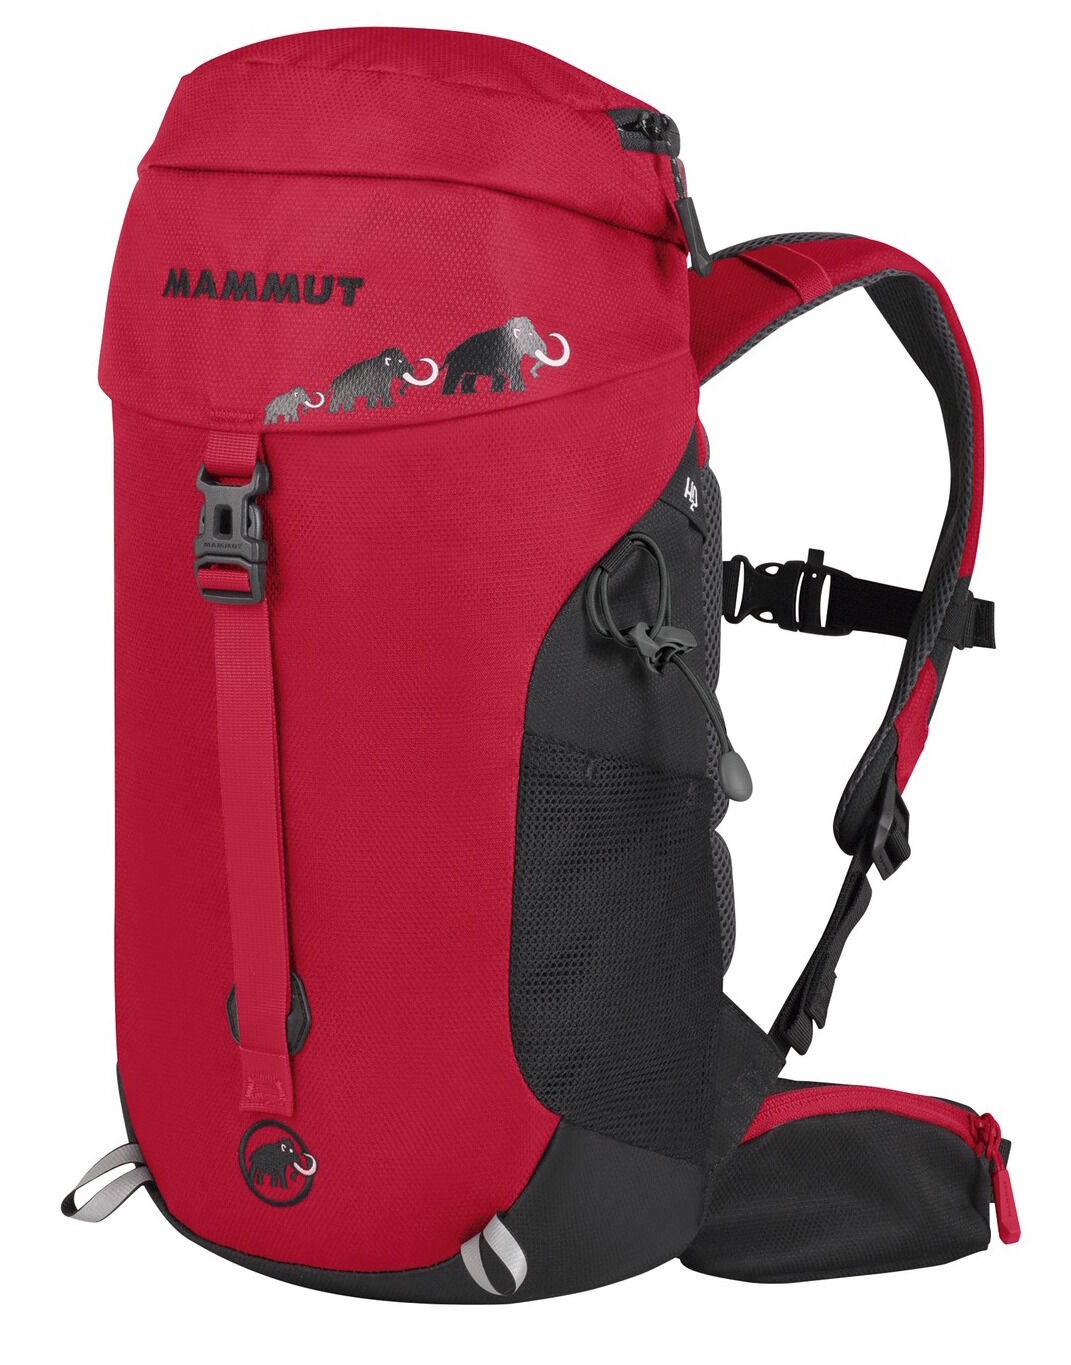 Mammut - First Trion 12 L - Backpack - Kids